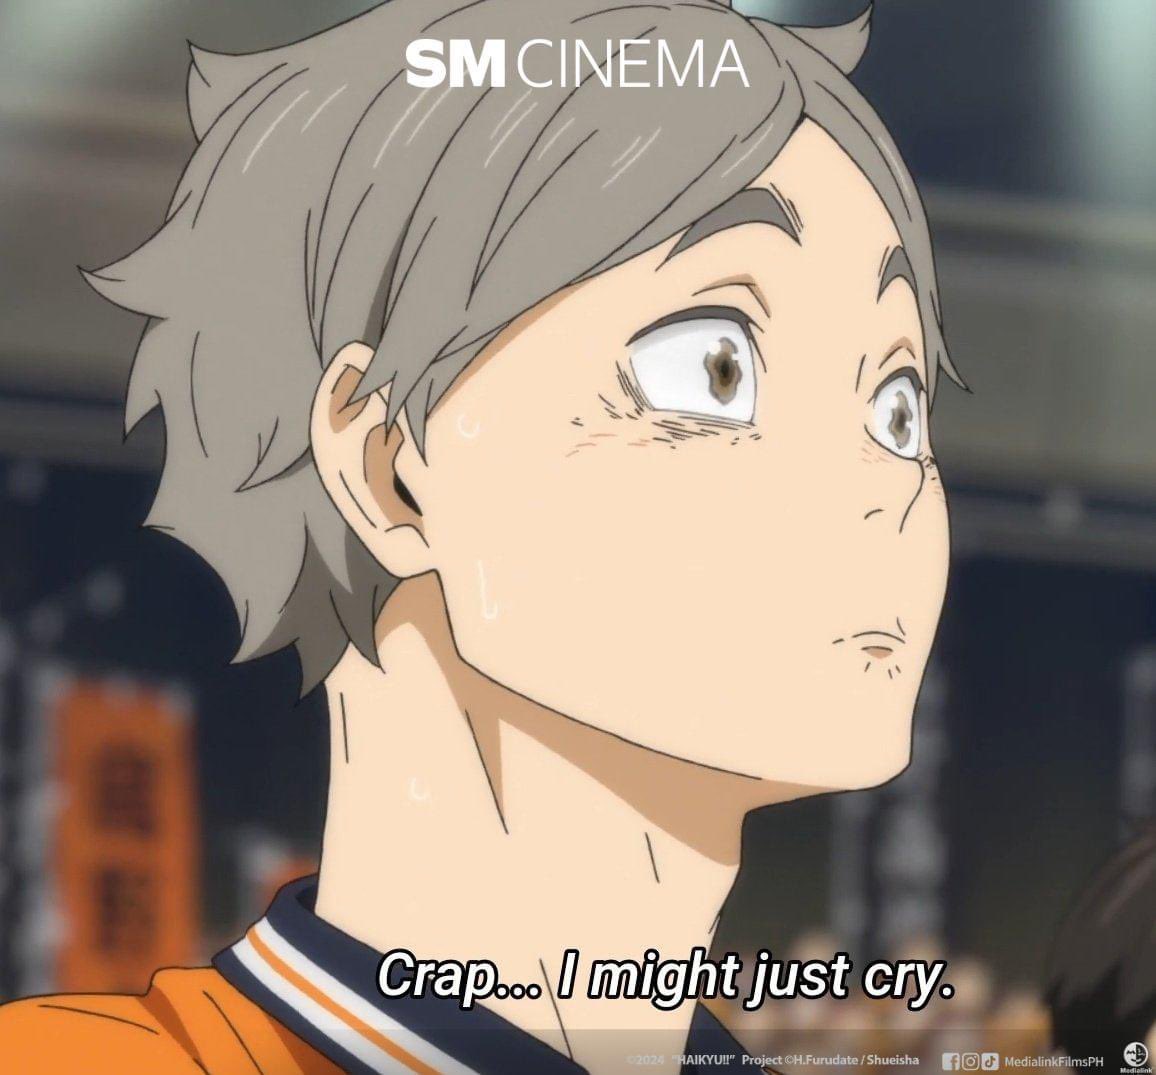 POV: This is your initial reaction after watching #TheDumpsterBattle 🔥

Show your support to Haikyuu's anime sequel 'The Dumpster Battle,' now showing at SM Cinema and IMAX!

BUY YOUR TICKETS NOW!
🔗: bit.ly/HaikyuuTheDump…

#Haikyuu #TheDumpsterBattle #HaikyuuTheDumpsterBattle